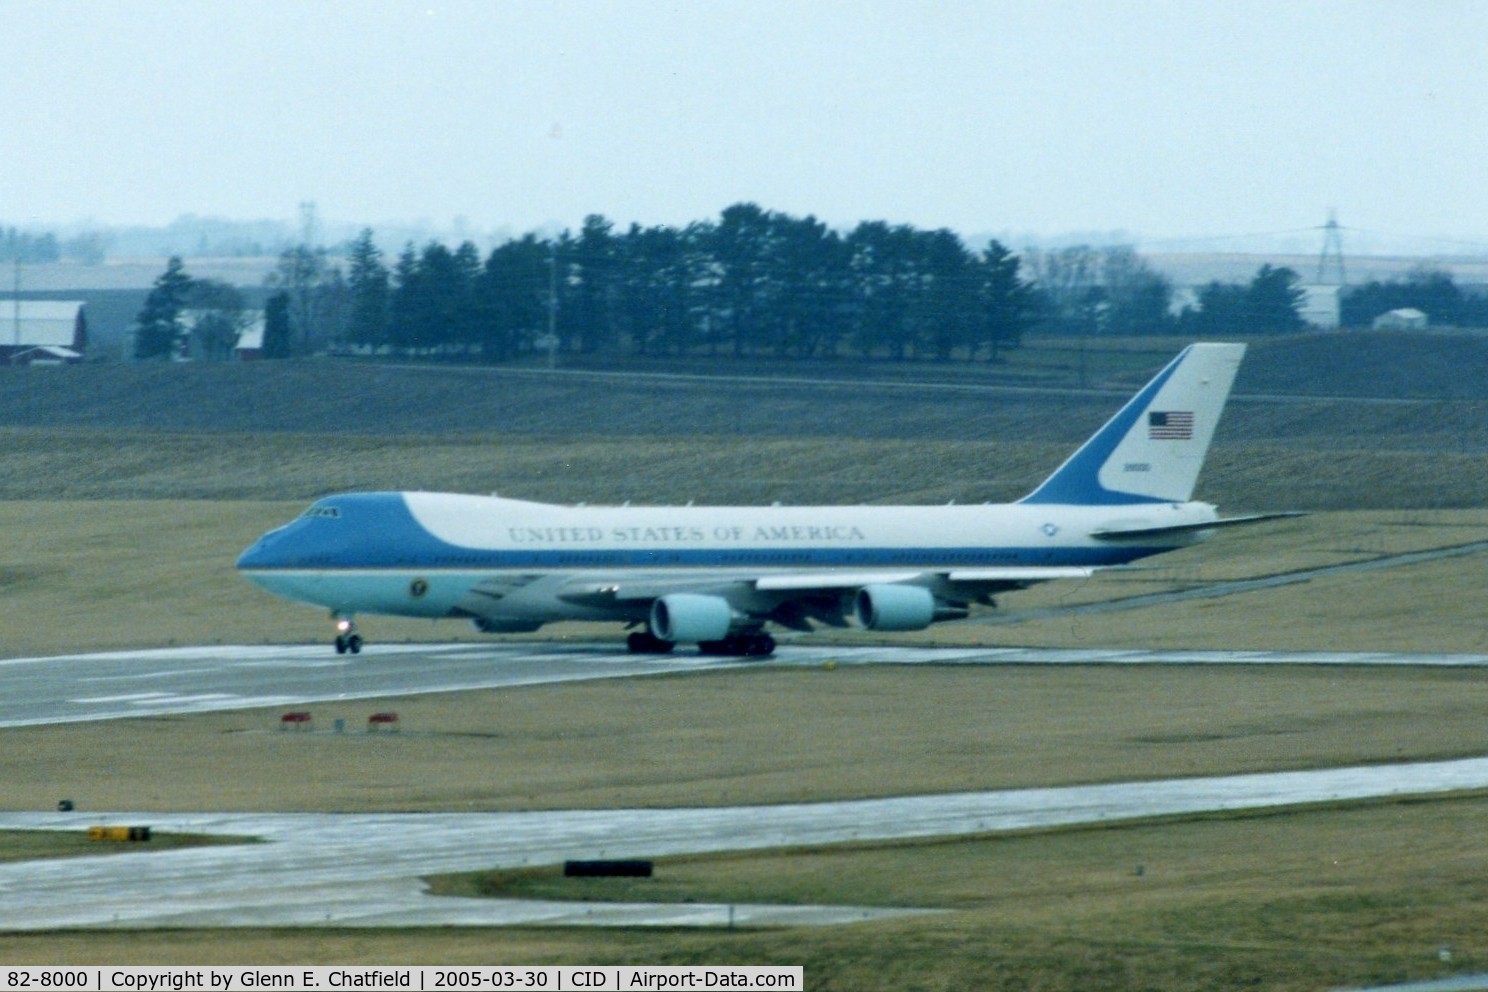 82-8000, 1987 Boeing VC-25A (747-2G4B) C/N 23824, Air Force One turning onto runway 9, almost a mile from me and my 600mm lens